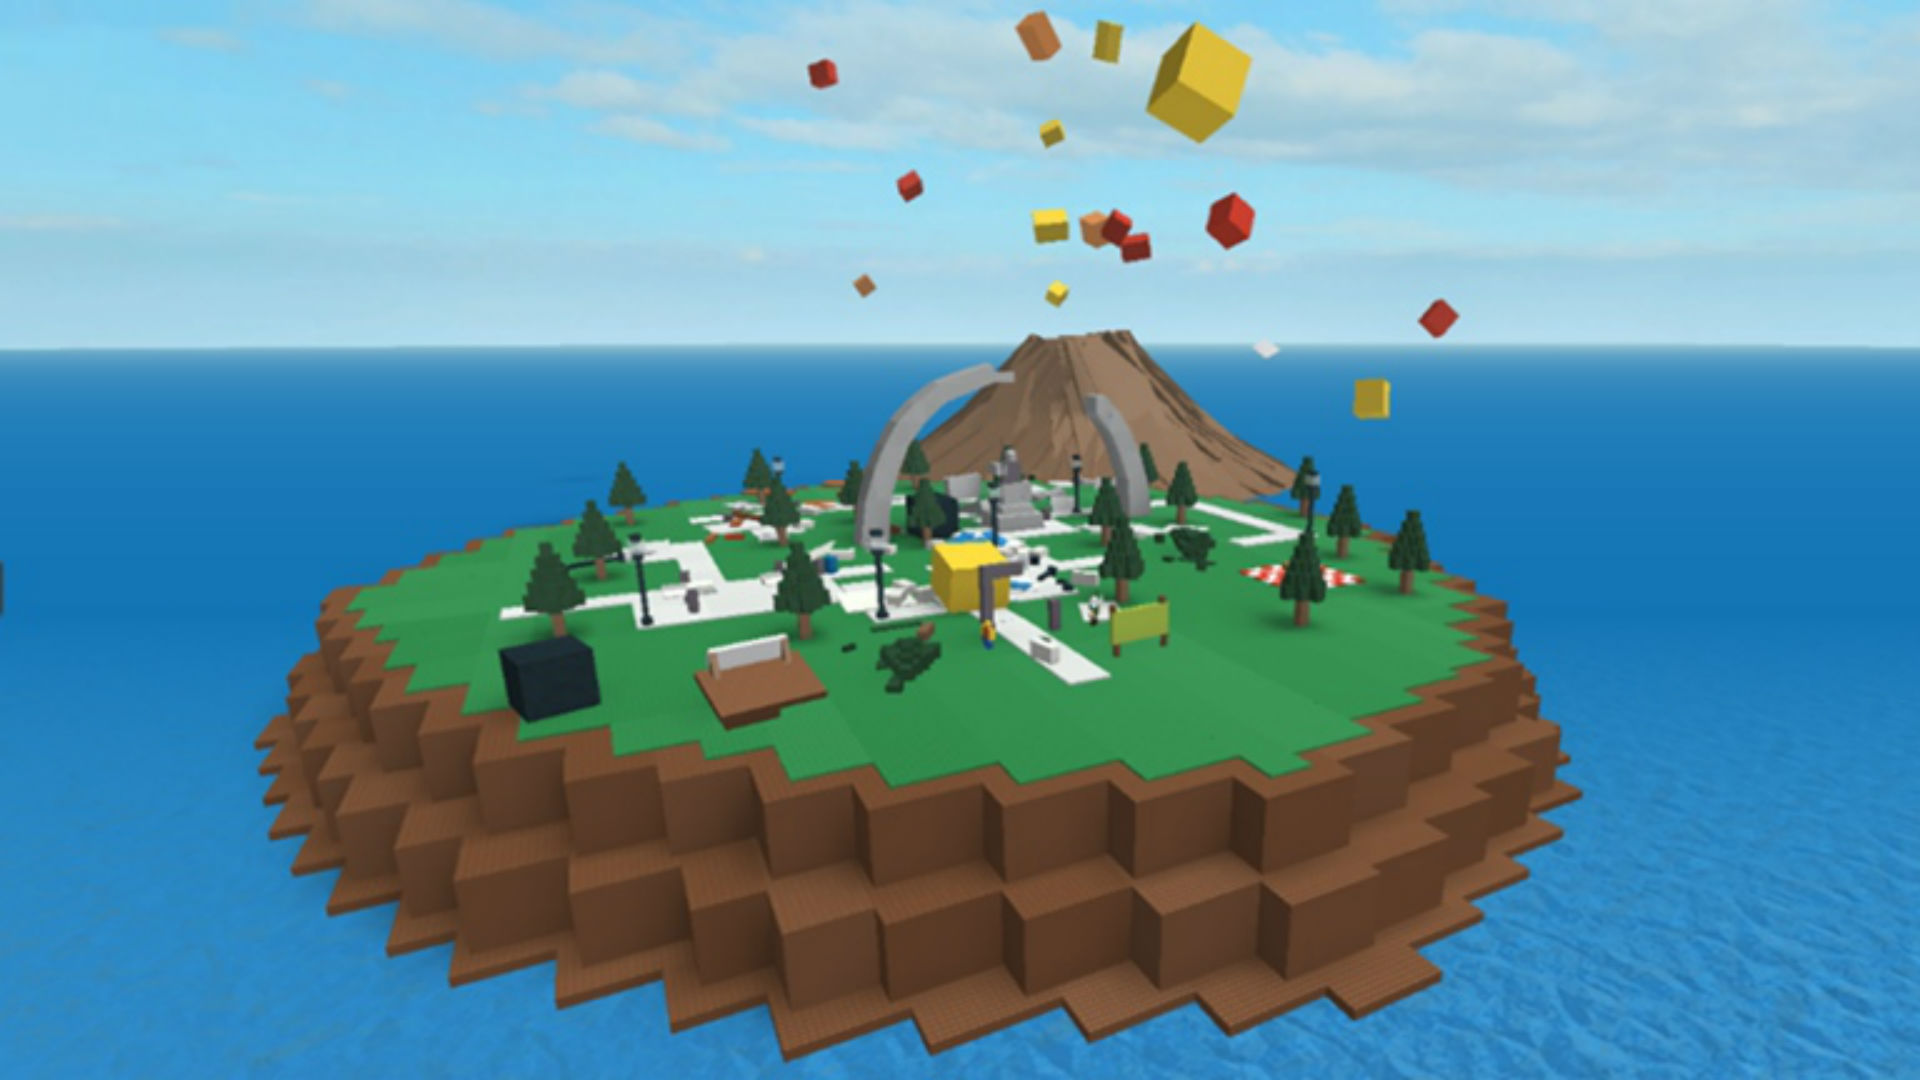 Most Popular Old Games On Roblox